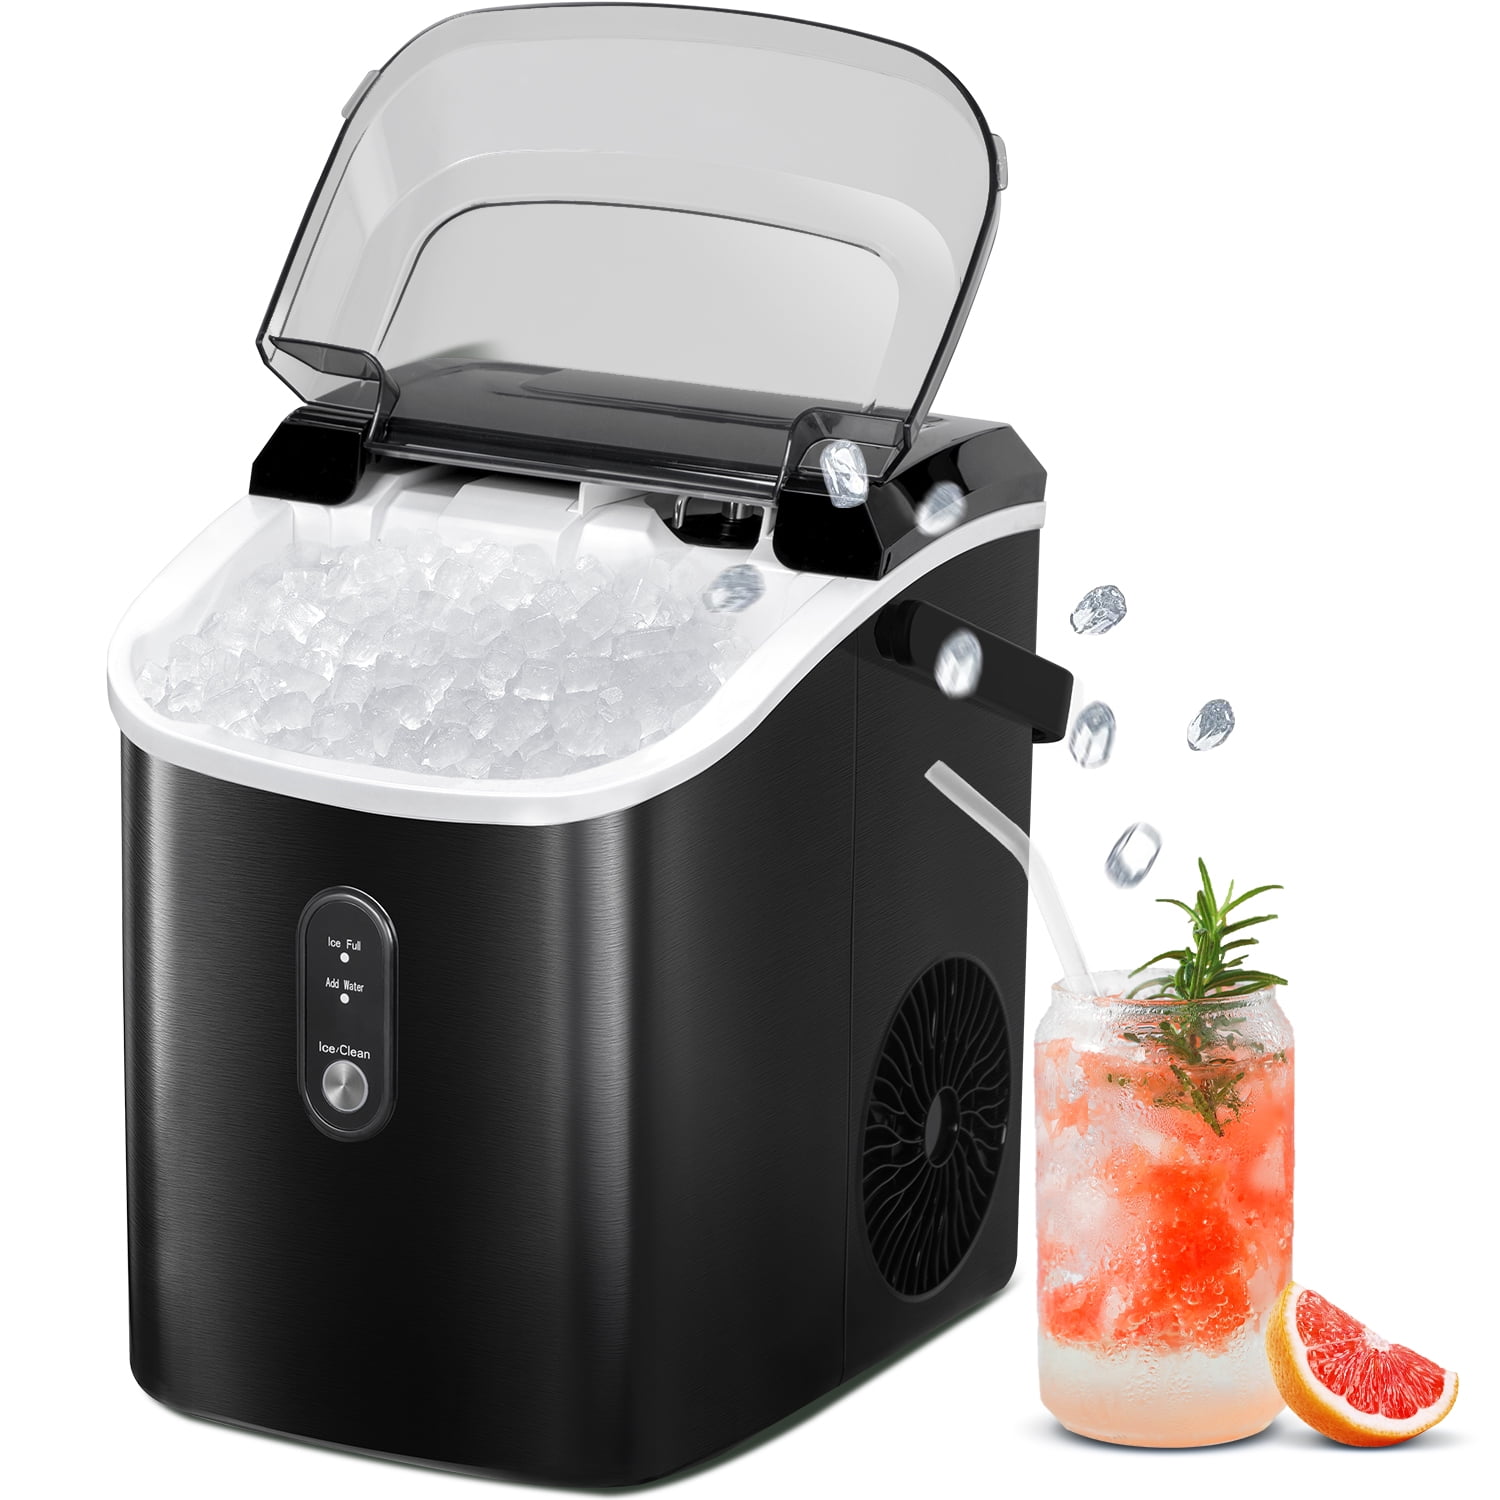 Auseo Countertop Nugget Ice Maker, Self-cleaning Portable Ice Maker ...